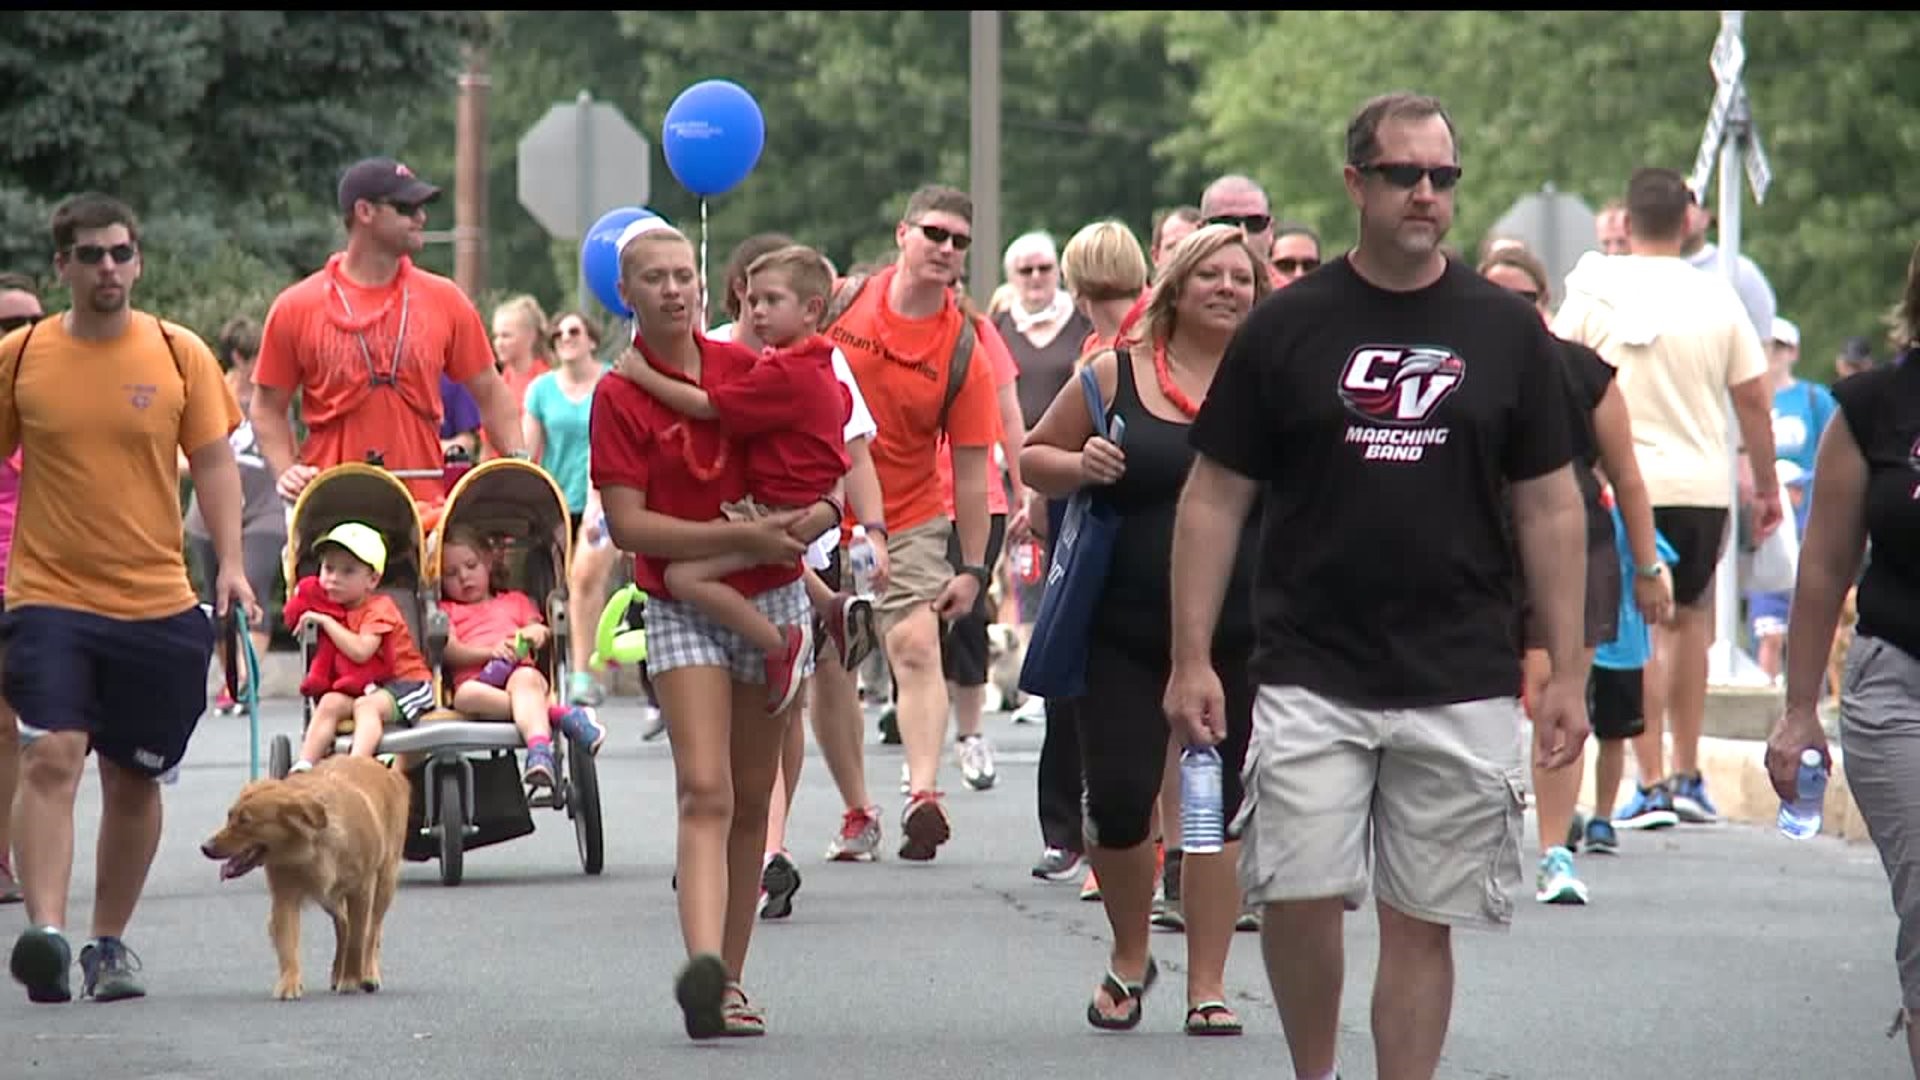 Steps will be taken for Crohn`s and Colitis in Harrisburg this weekend